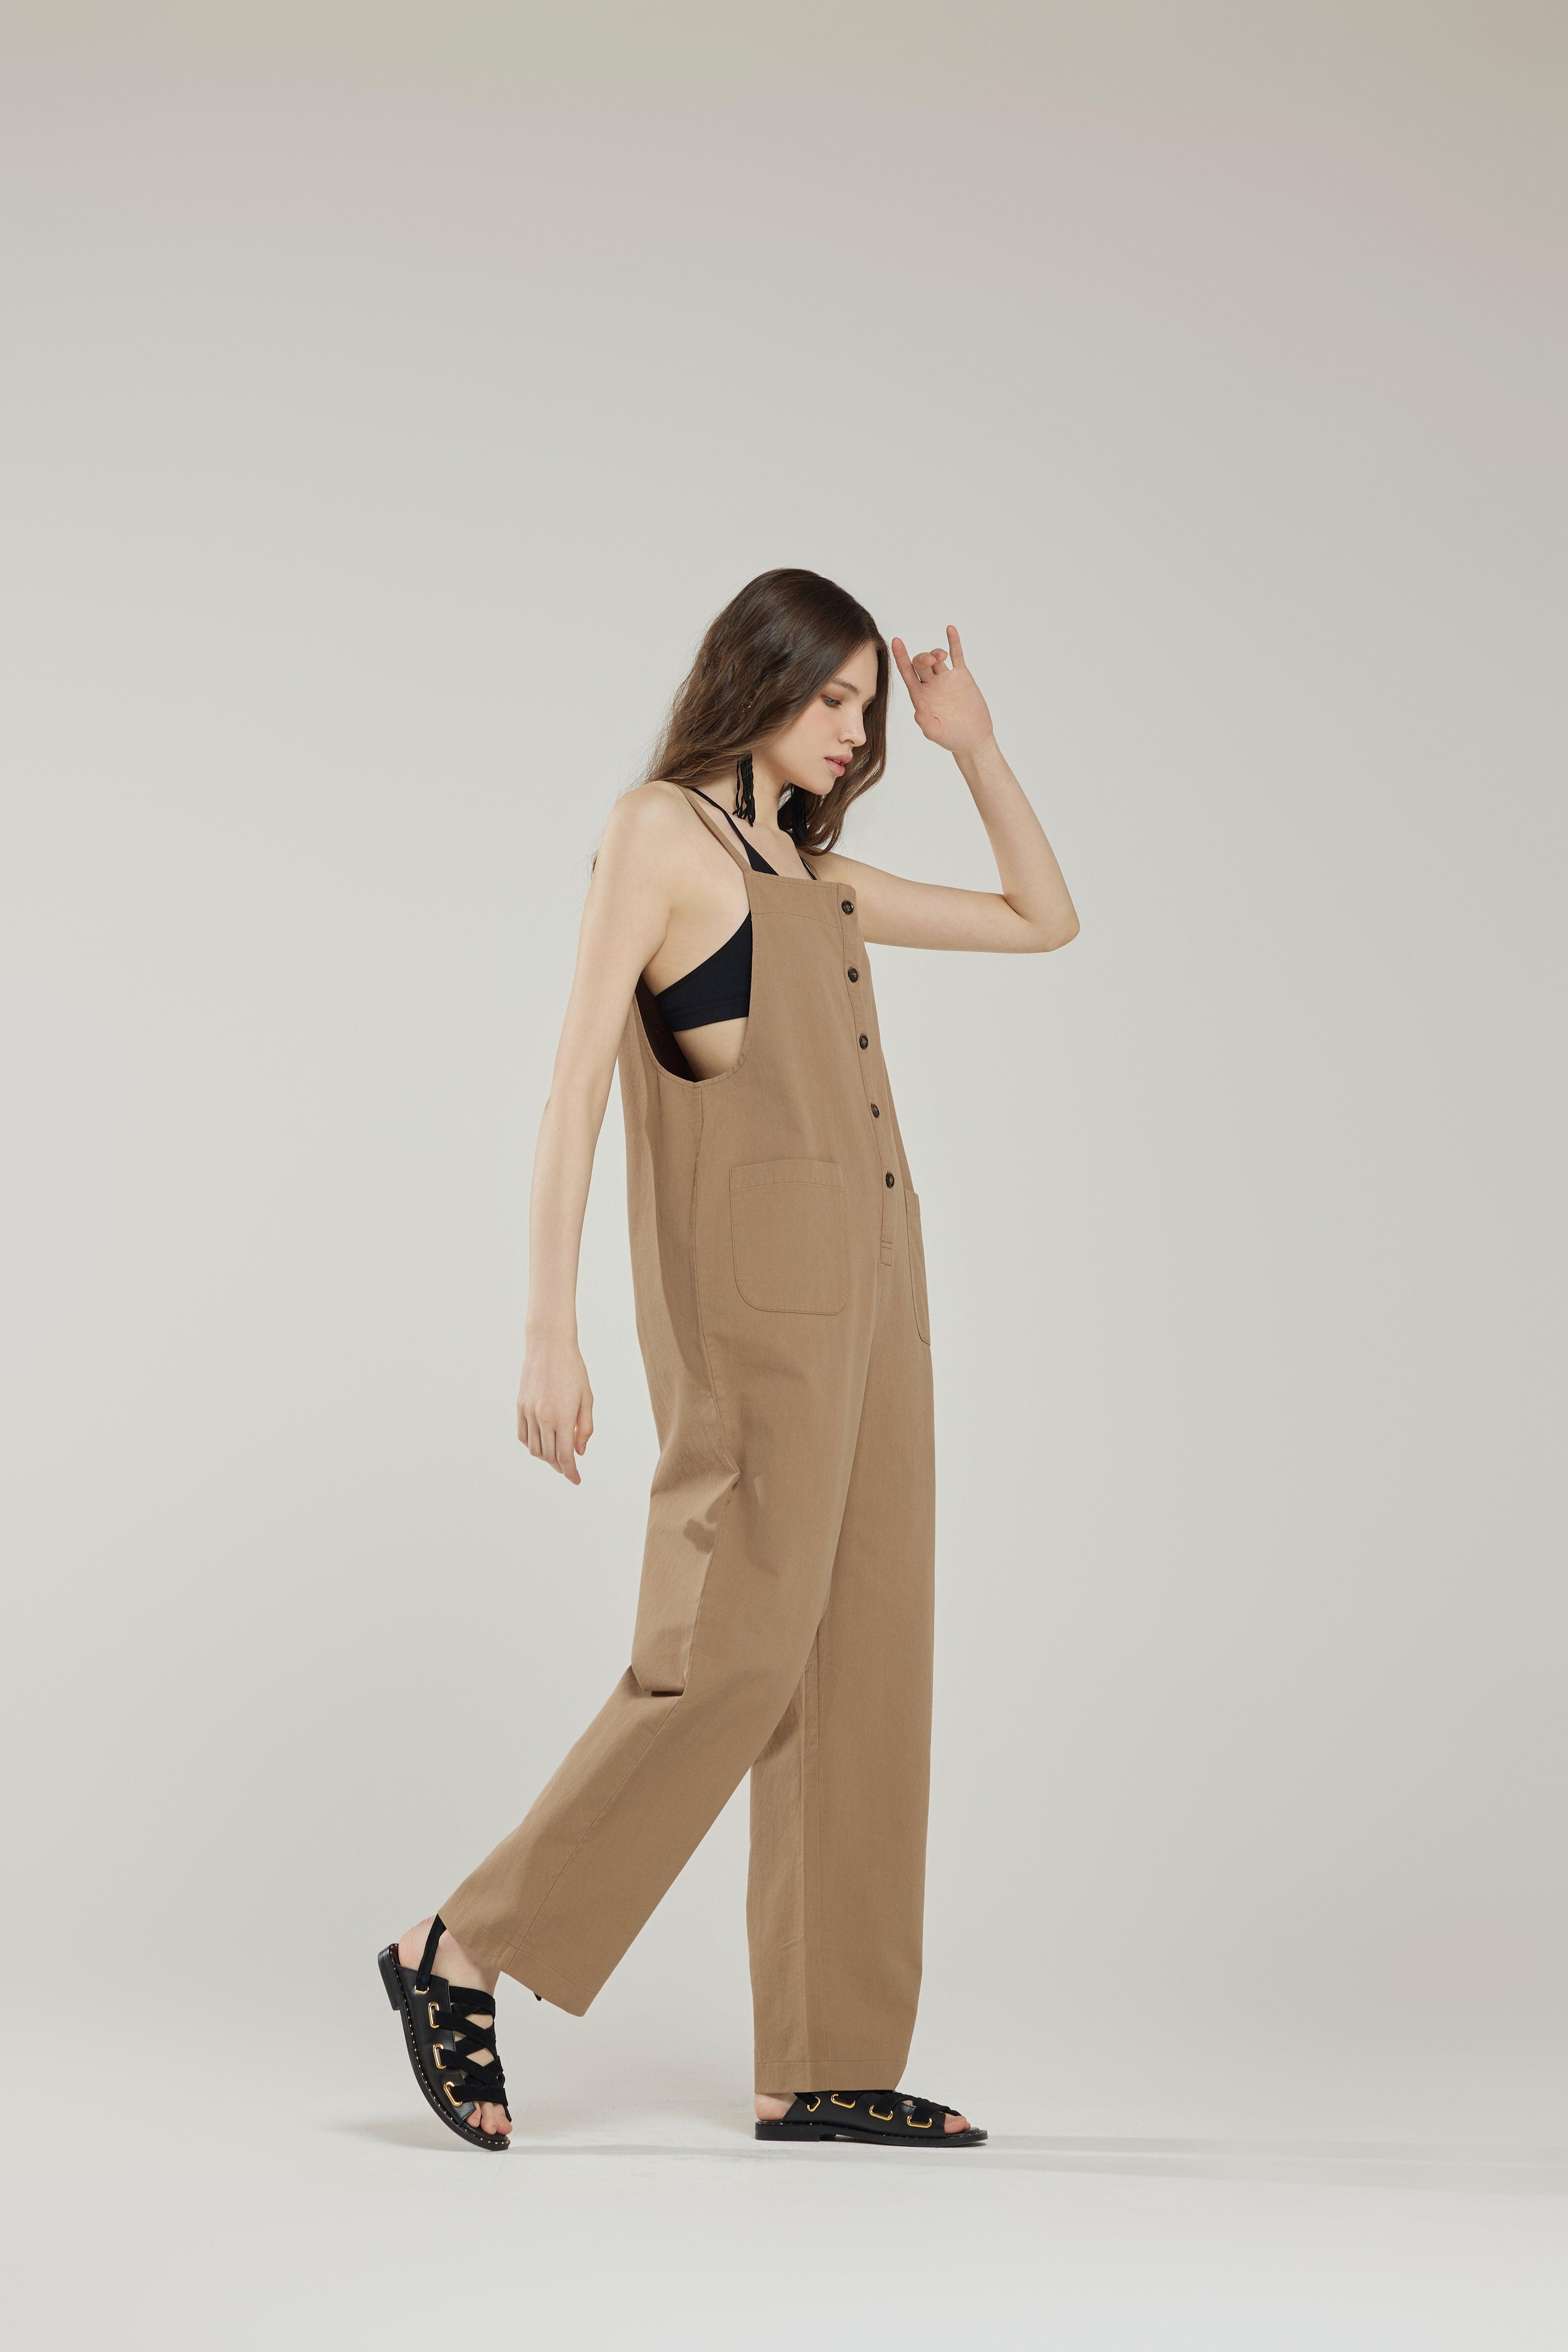 100% cotton Button Down Sleeveless Overalls Jumpsuit with Pockets - Mocha - noflik